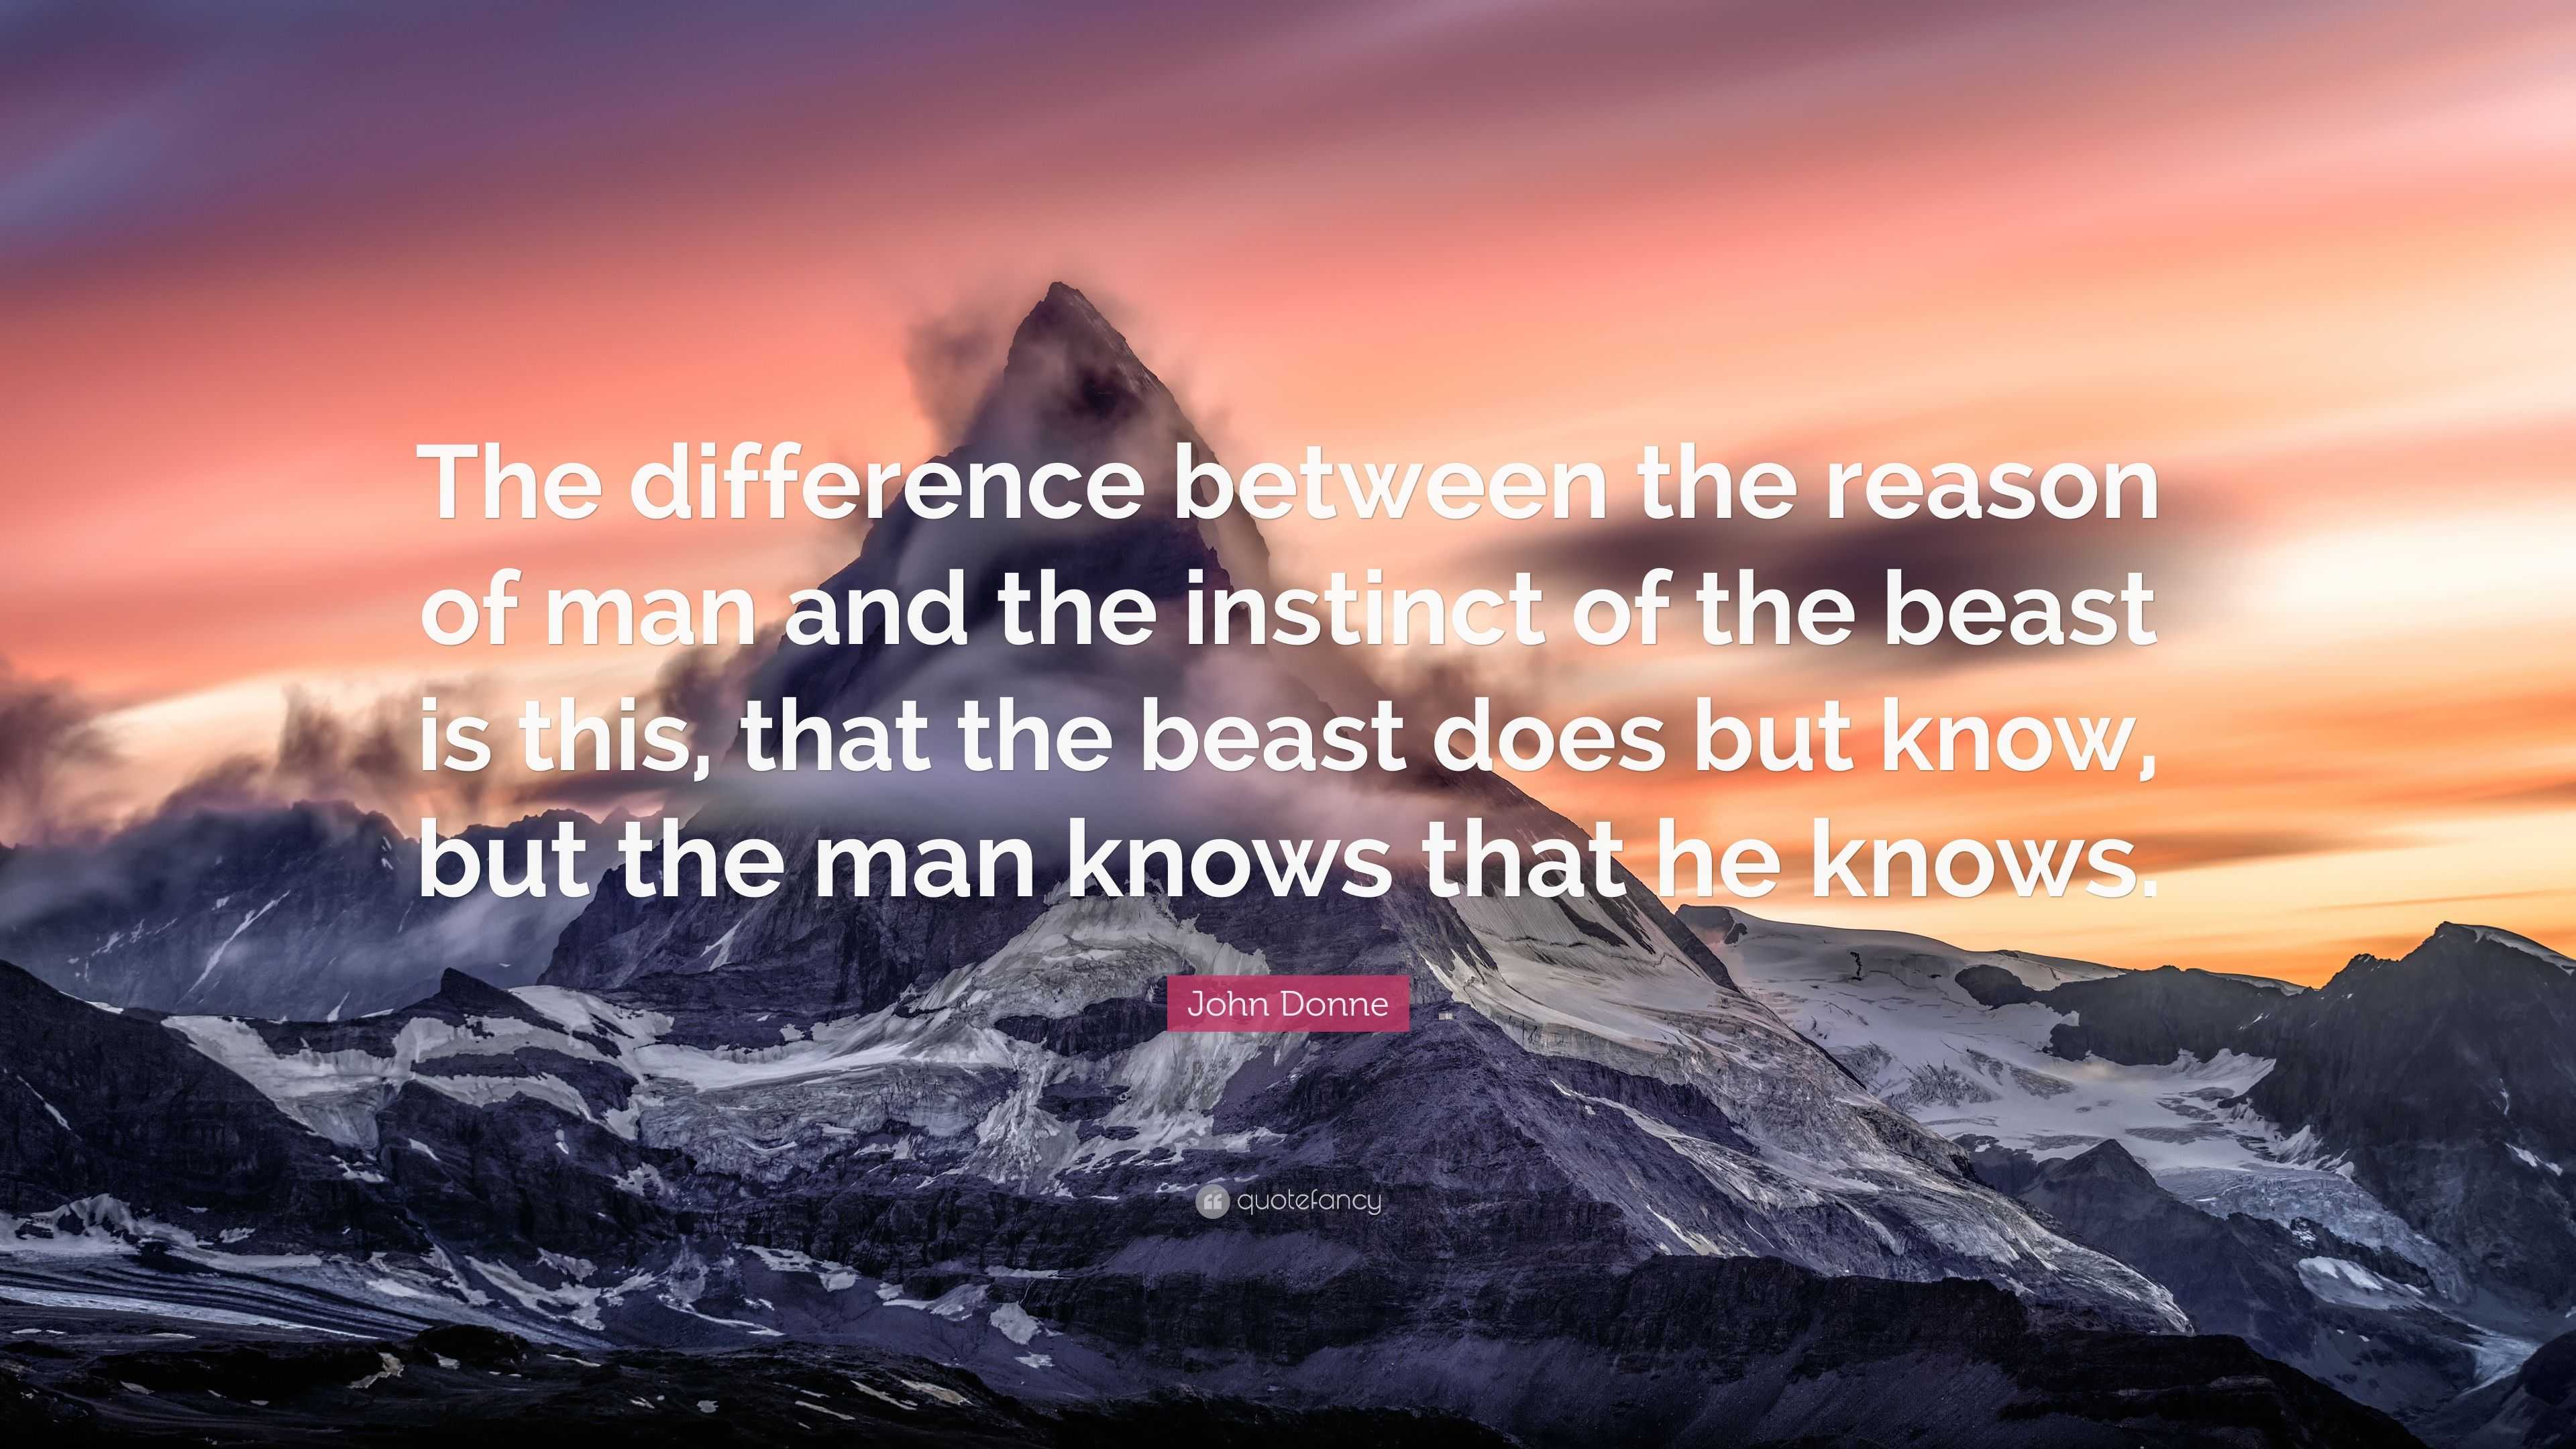 John Donne Quote: “The difference between the reason of man and the  instinct of the beast is this